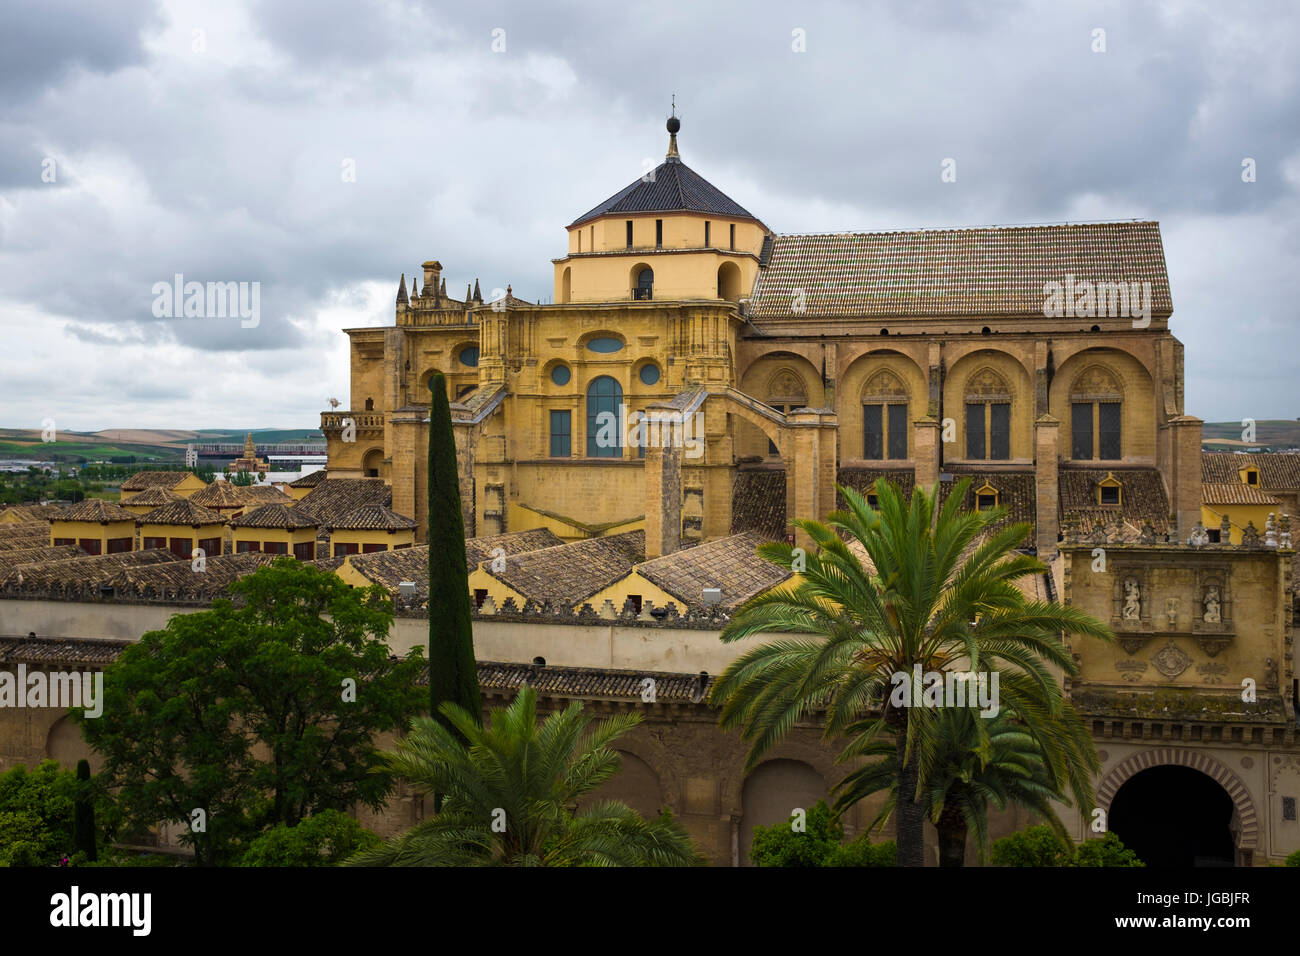 Cloudy sky's over the the catholic cathedral within the Mezquita, or Grand Mosque, Cordoba, Spain. Stock Photo